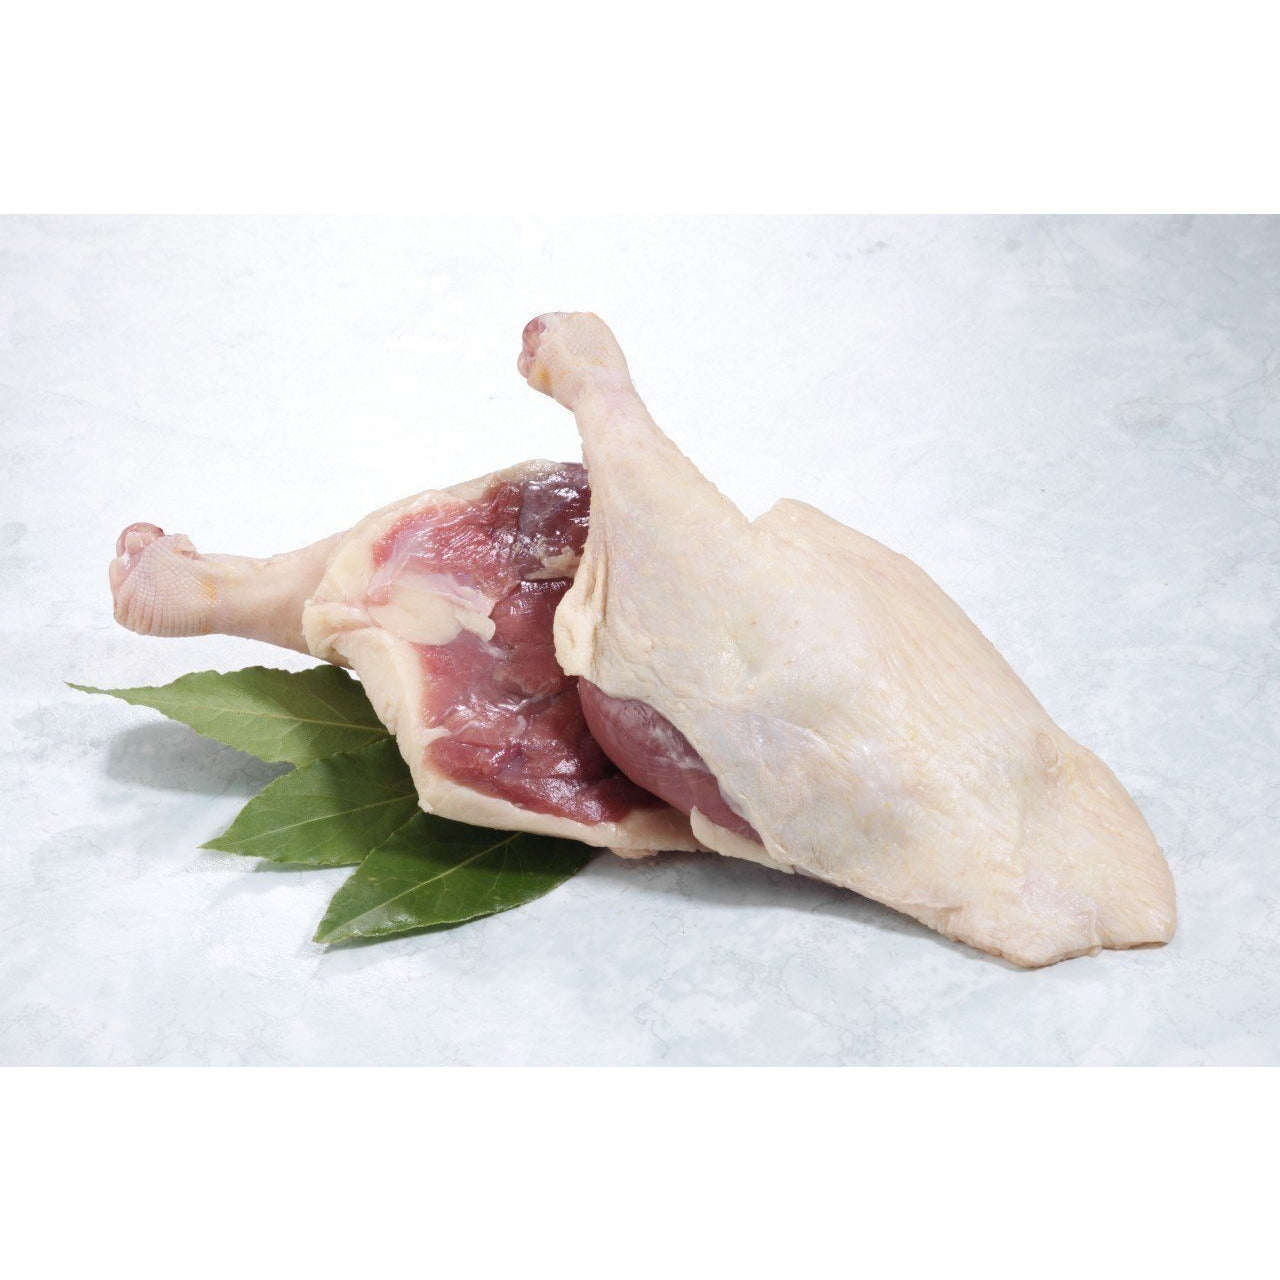 duck legs [about 1-1.3 lbs]